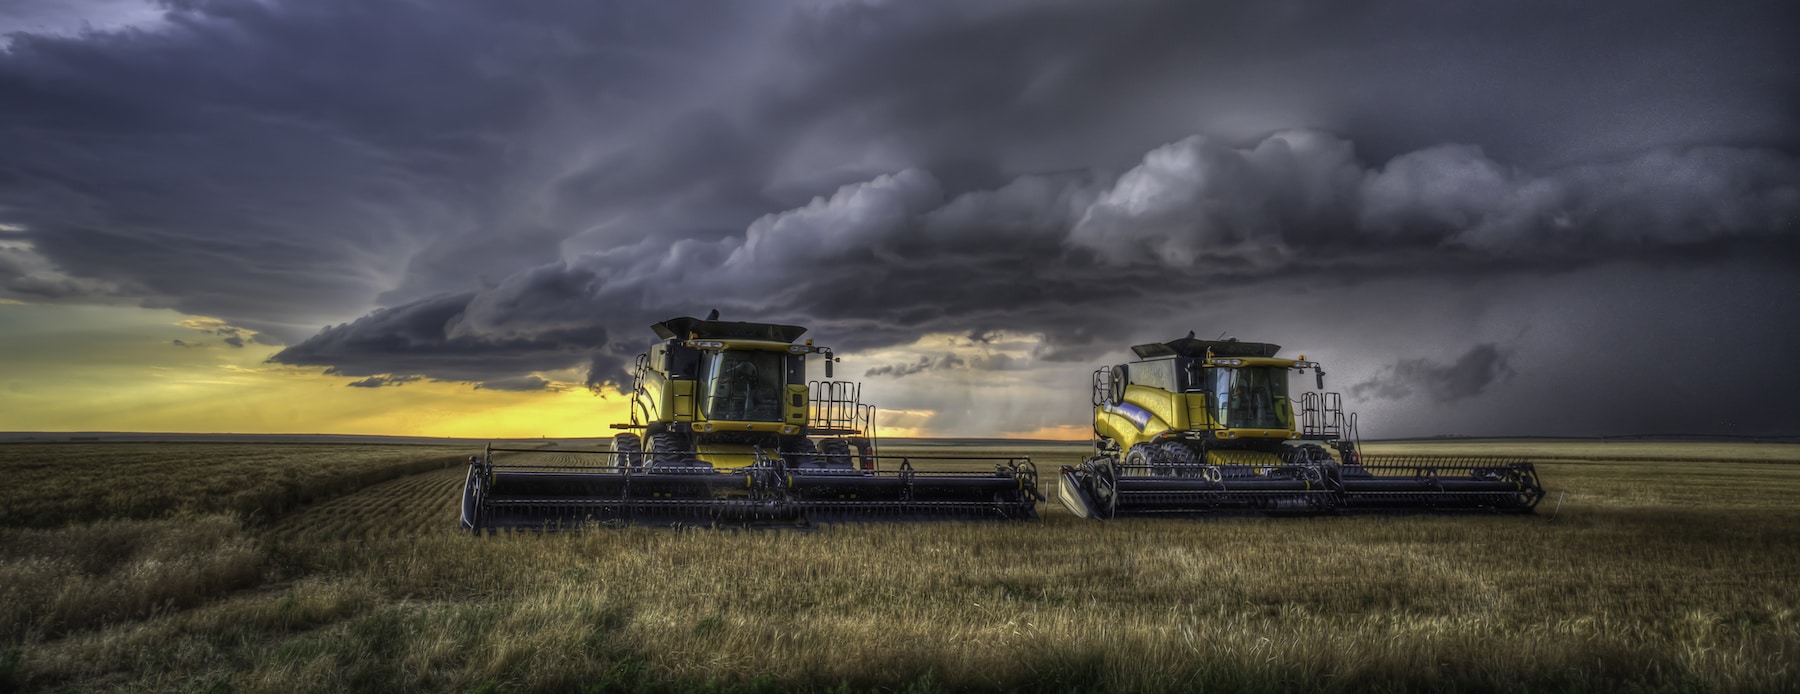 The agricultural equipment industry has long considered itself immune from cyber attacks. After all: farm equipment wasn’t Internet-connected and th